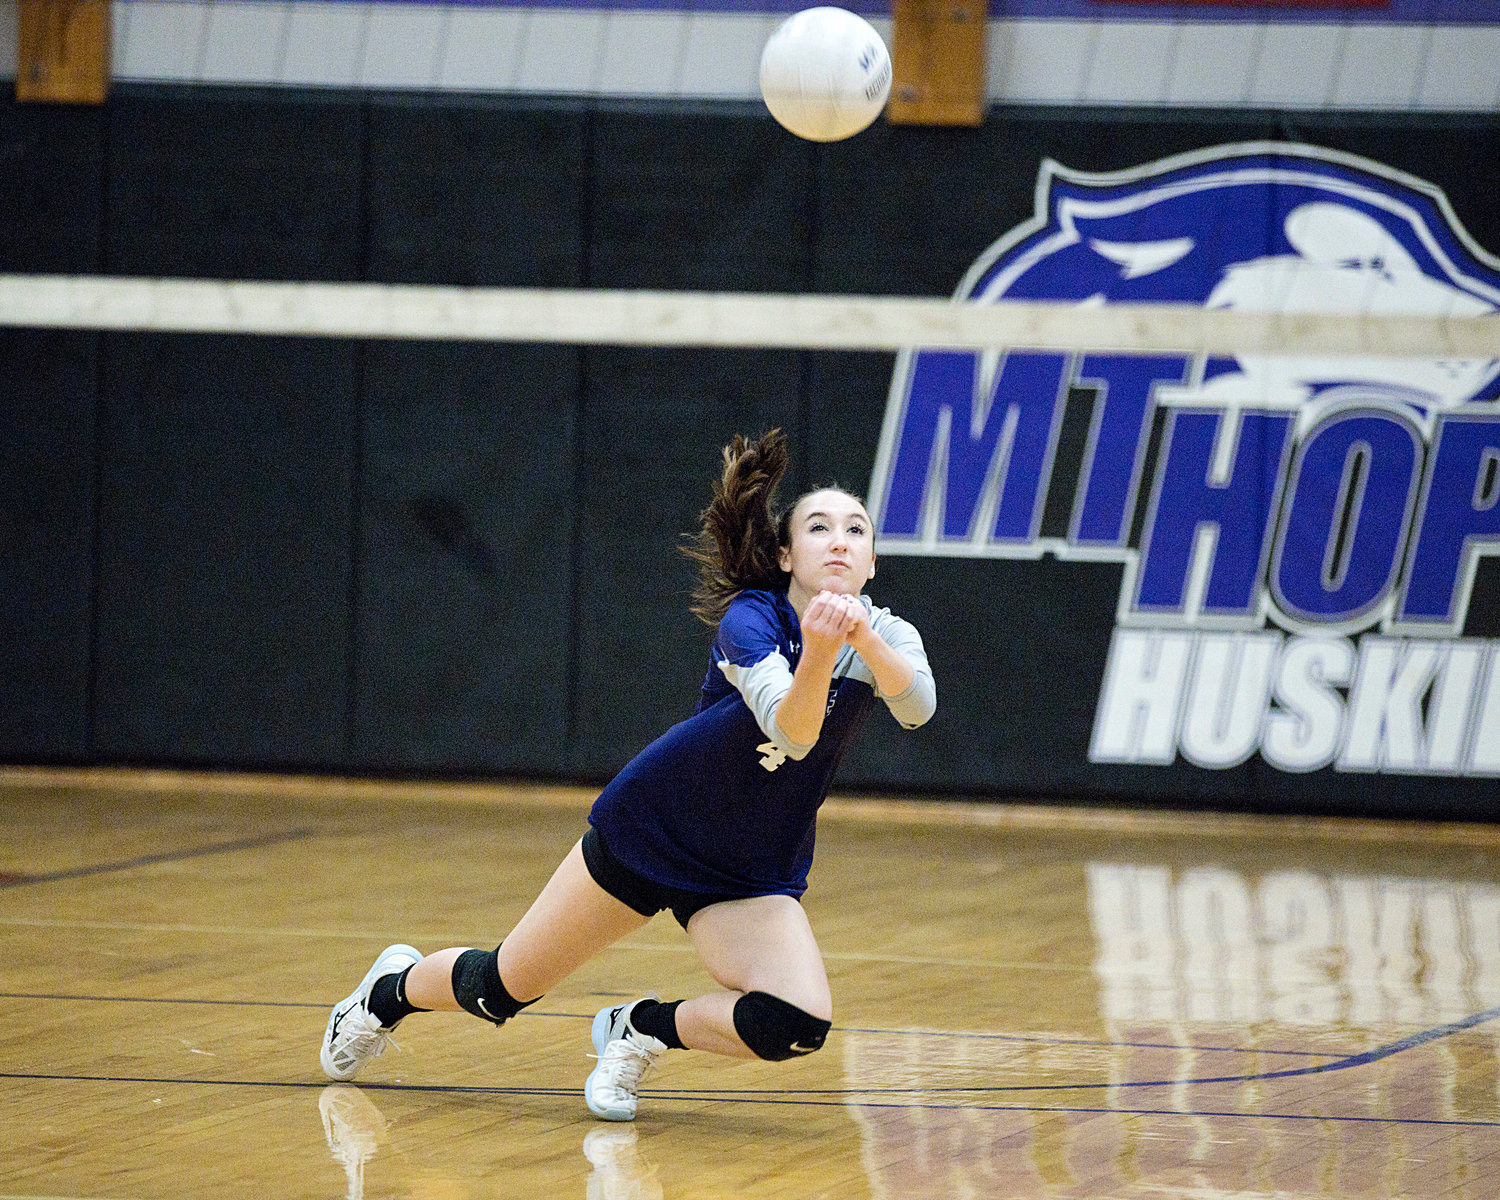 Gwenyth Tucker dives under the the ball while receiving a serve from a Lincoln opponent.